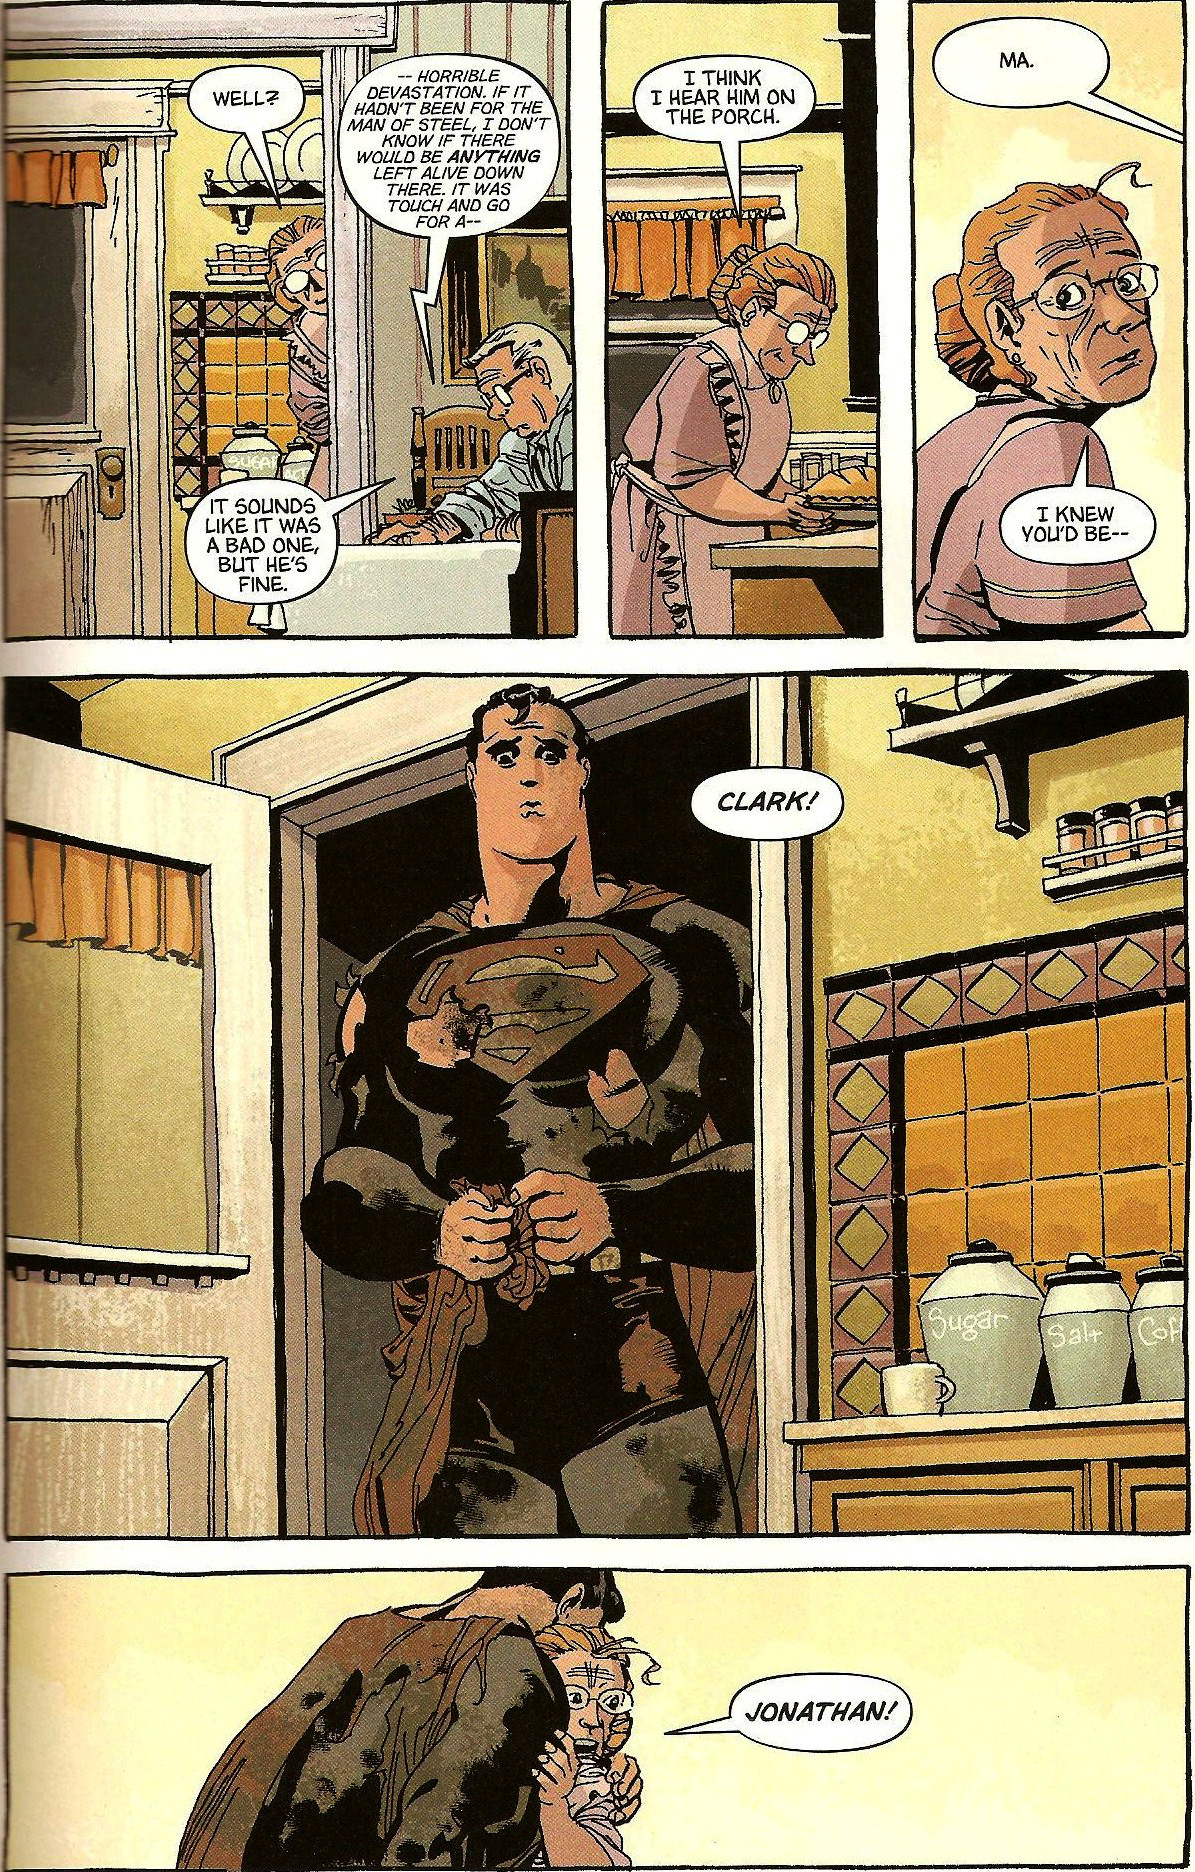 From Superman Confidential #2 (2007)